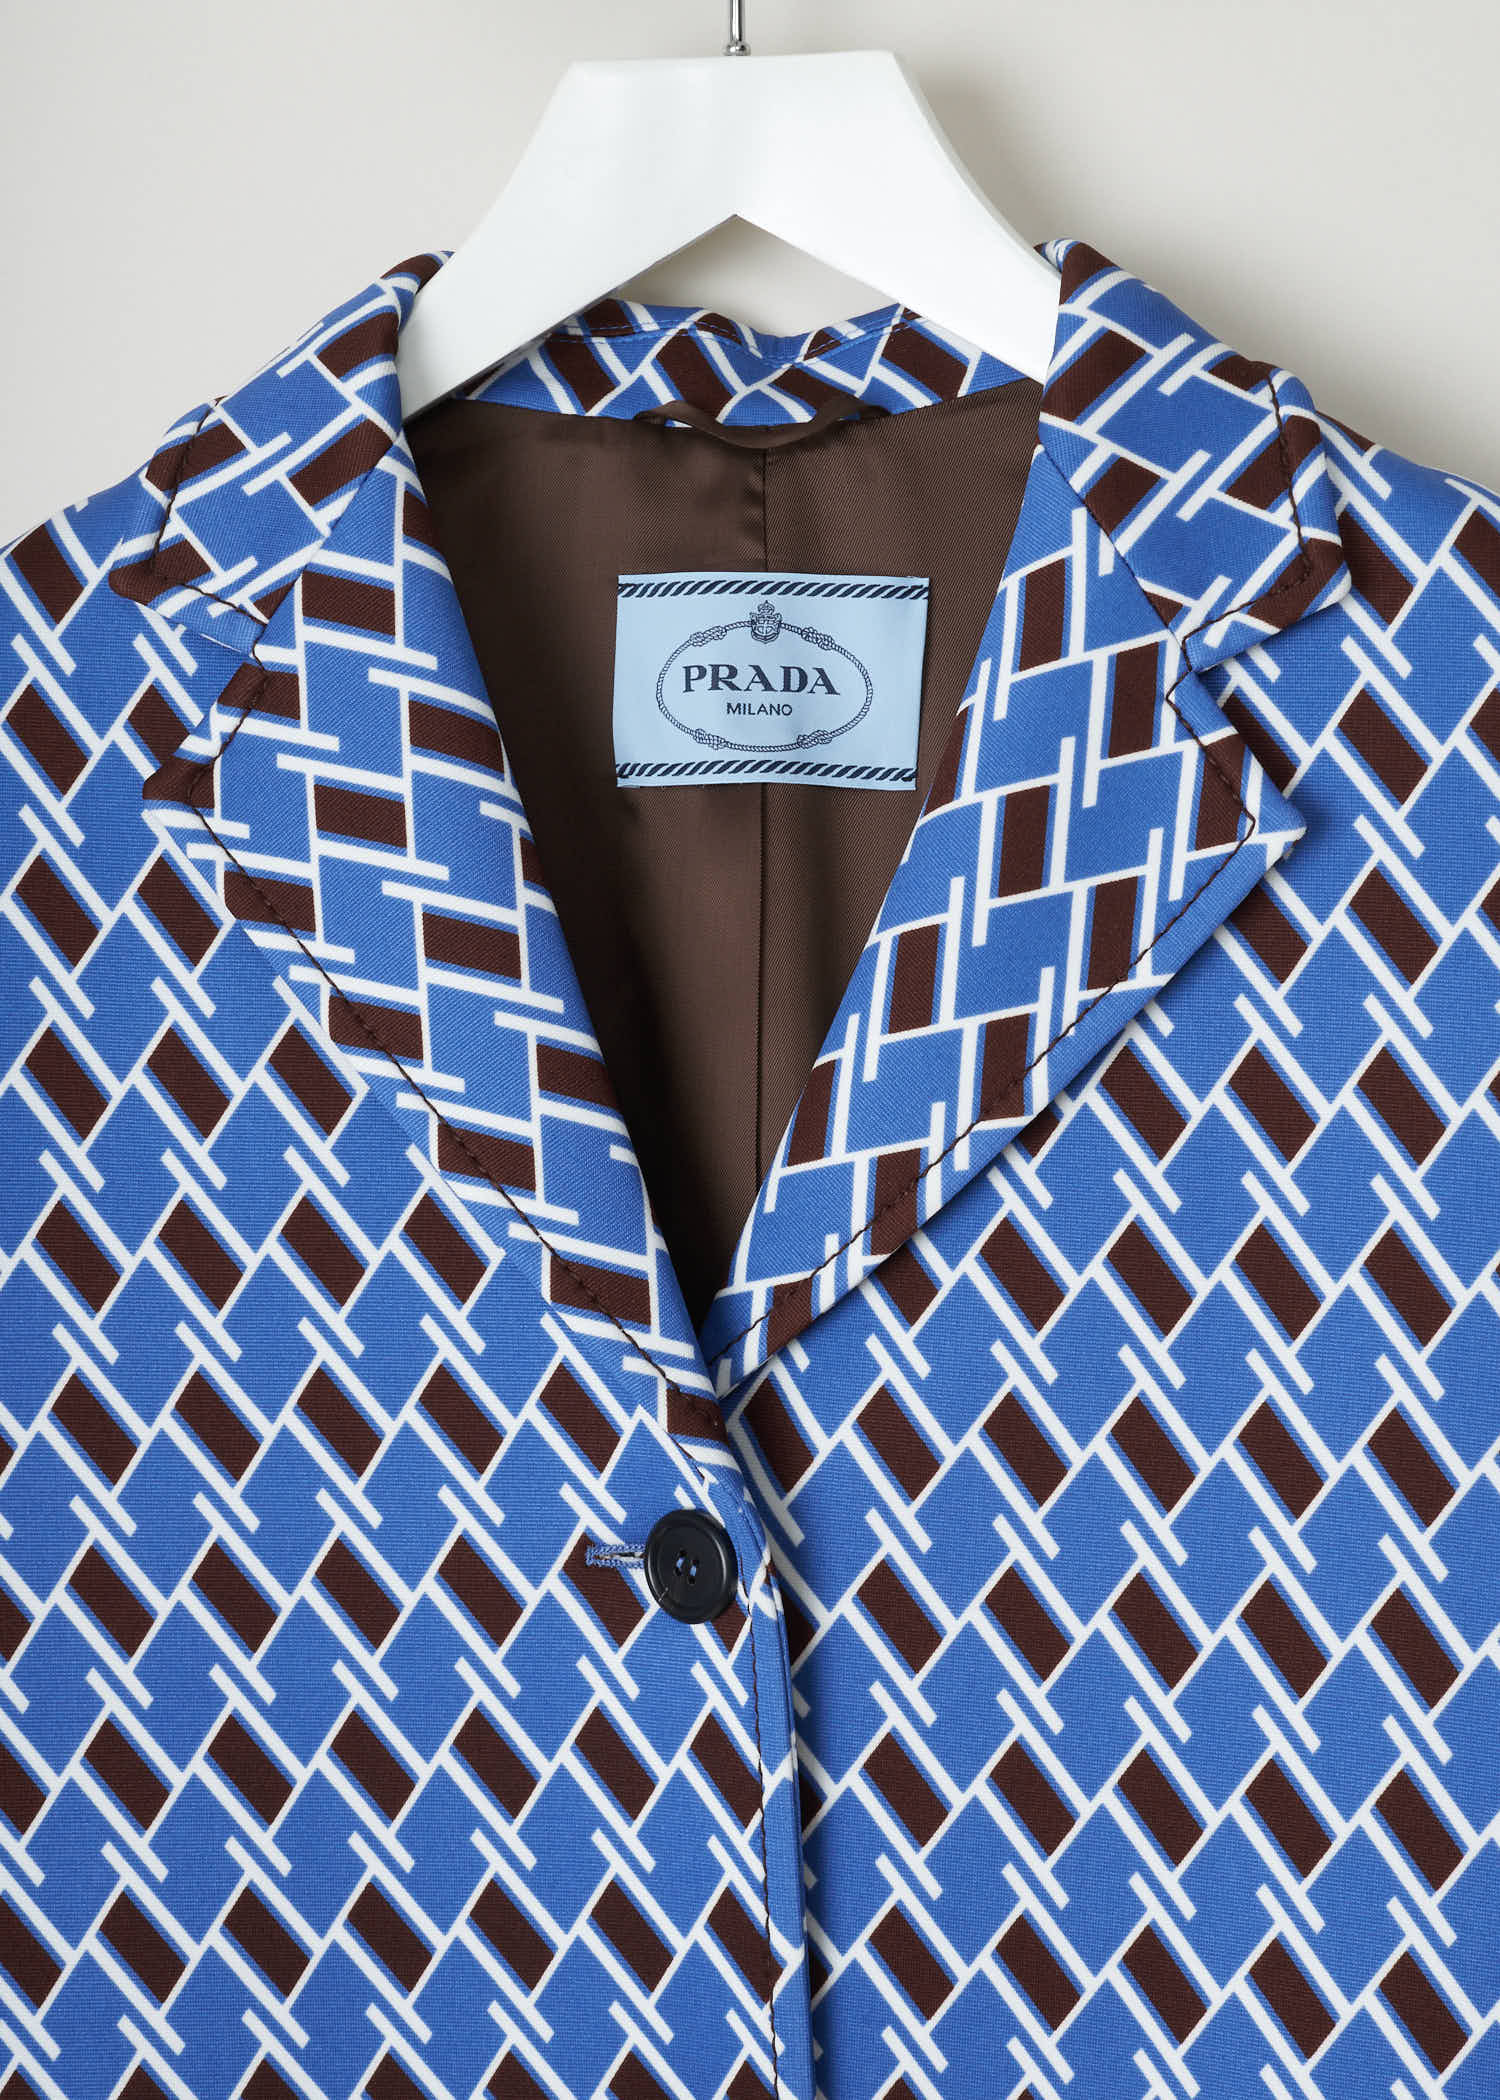 Prada tecno jersey argyle Tecno_Jersey_AR_P690II_F0237_Pervinca pervinca detail. Geometric illusion-print coat in blue and brown from argyle printed techno jersey with button front fastening, flap pockets and belted cuffs.